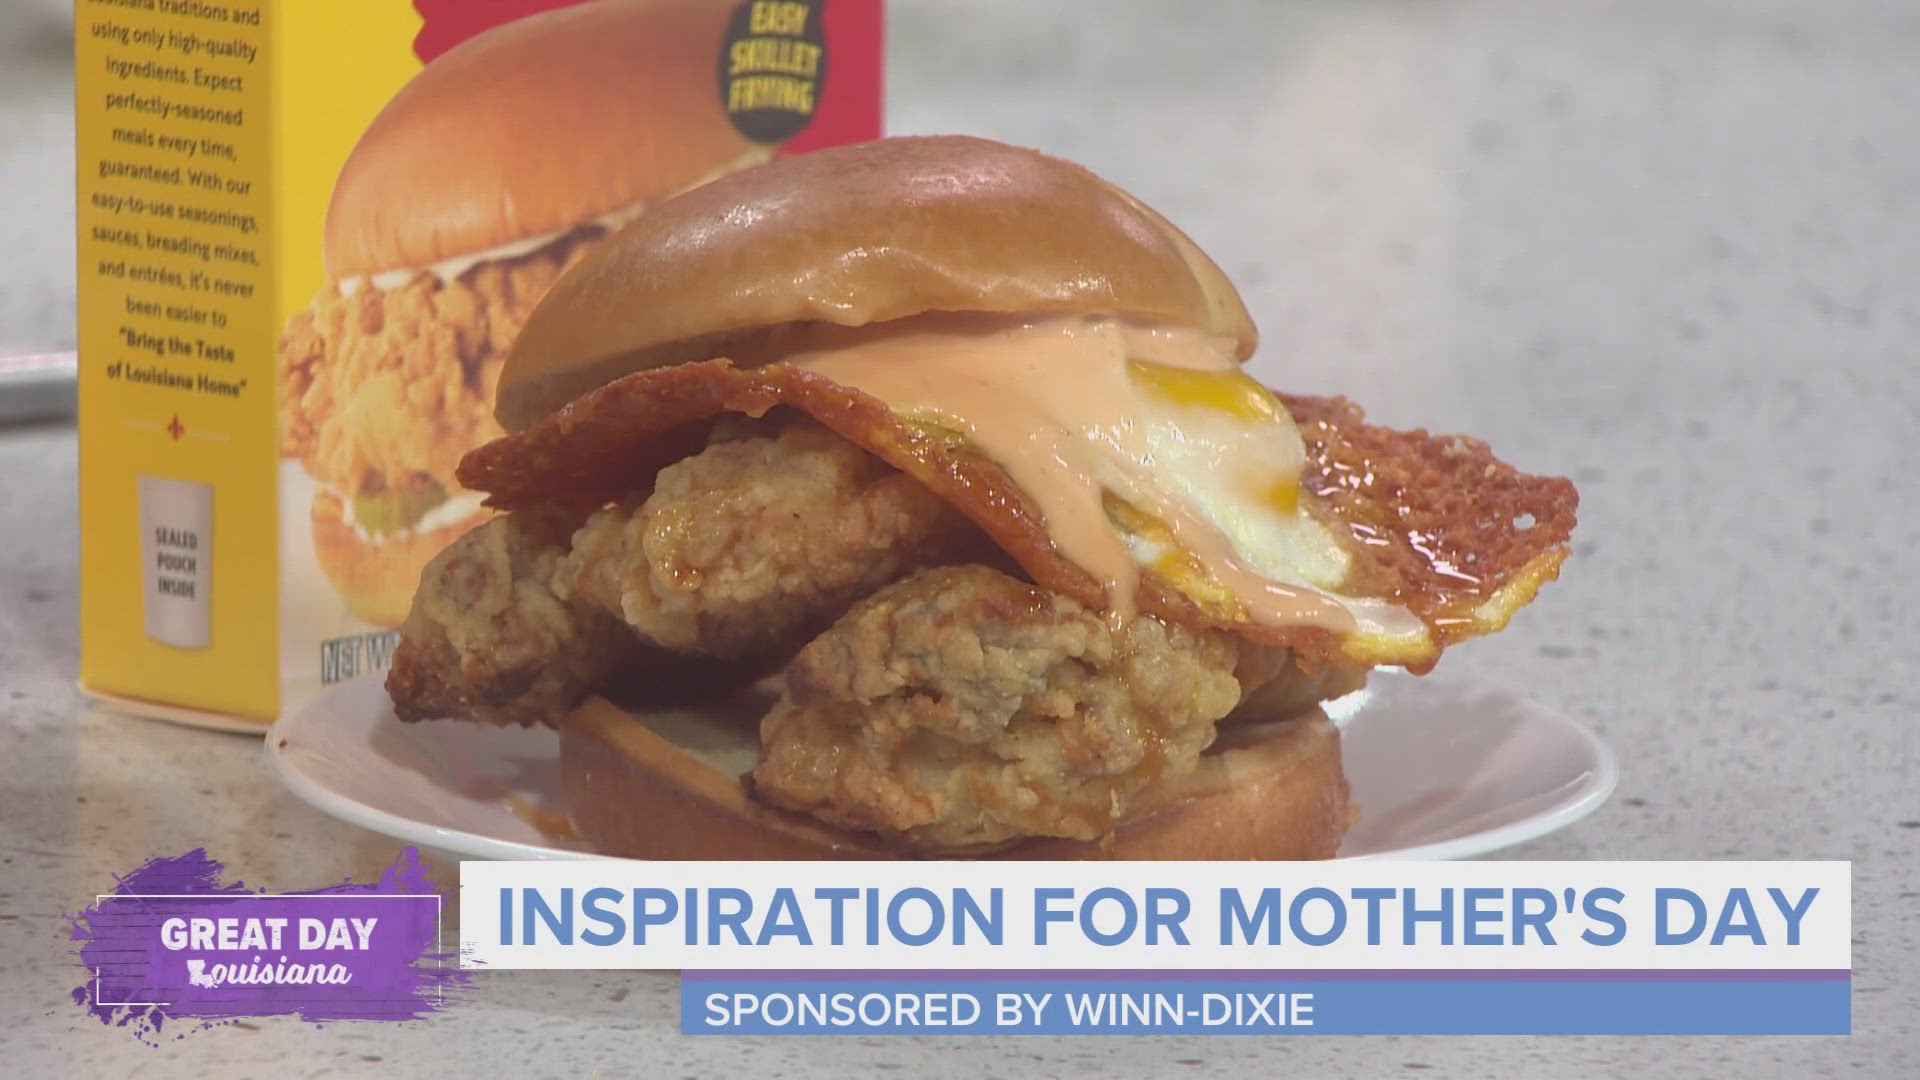 We get ideas for a delicious Mother's Day spread you can gift your mom with the help of Winn-Dixie.